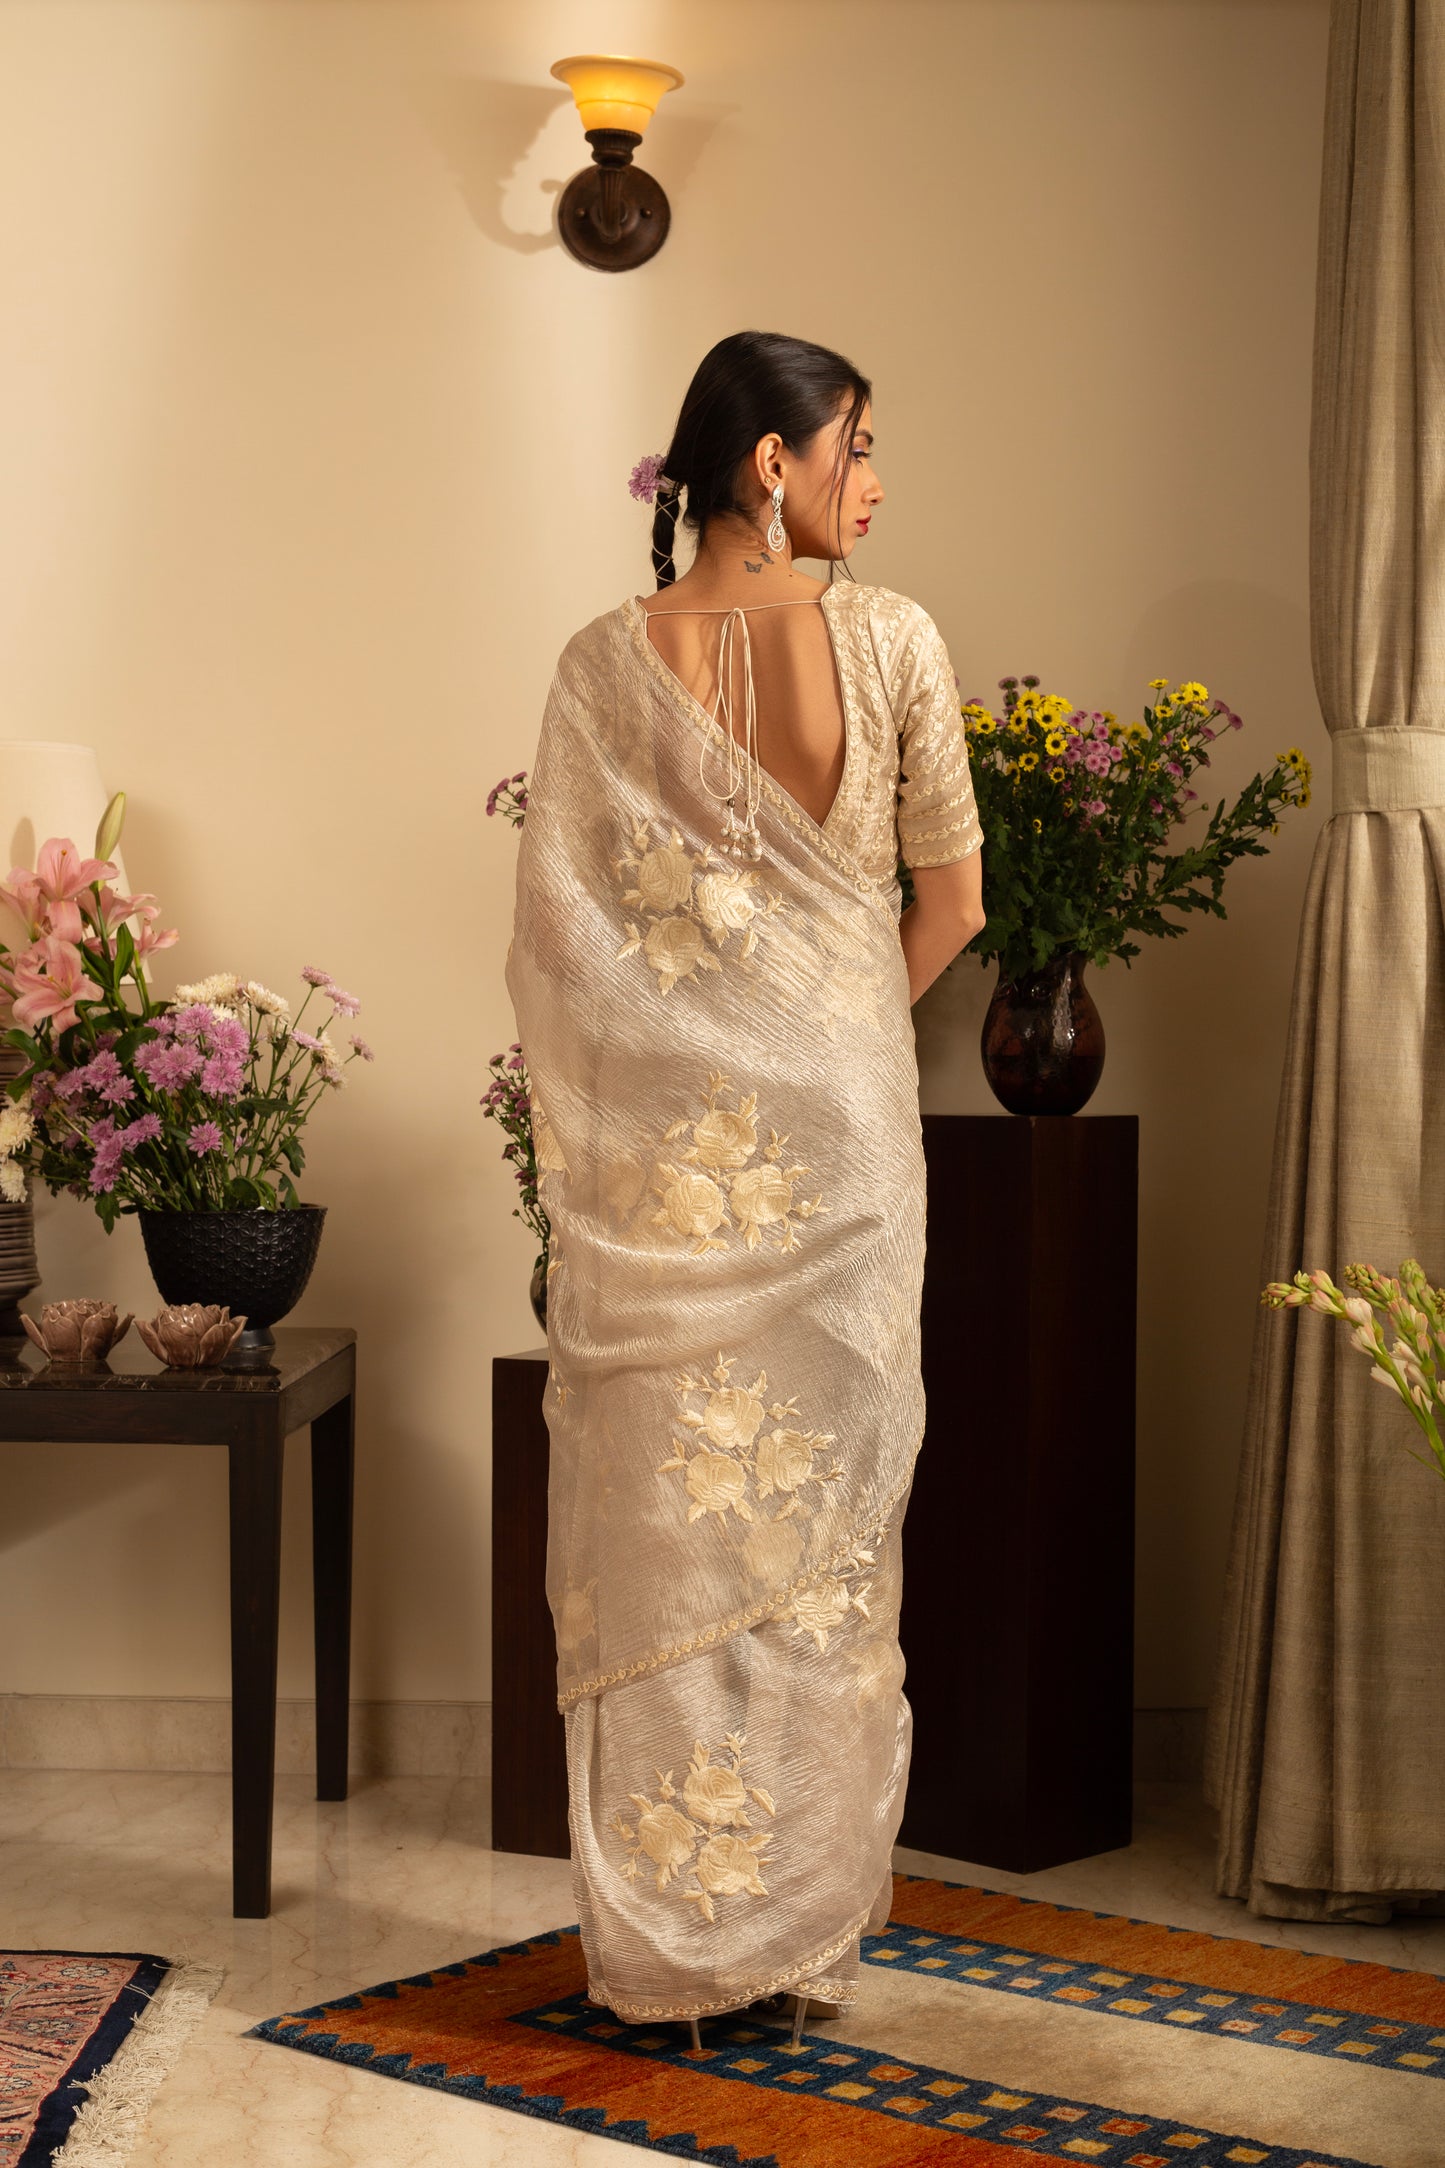 Gulab Soft Silver Pure Silk Tissue Handloom Saree with Parsi Embroidery